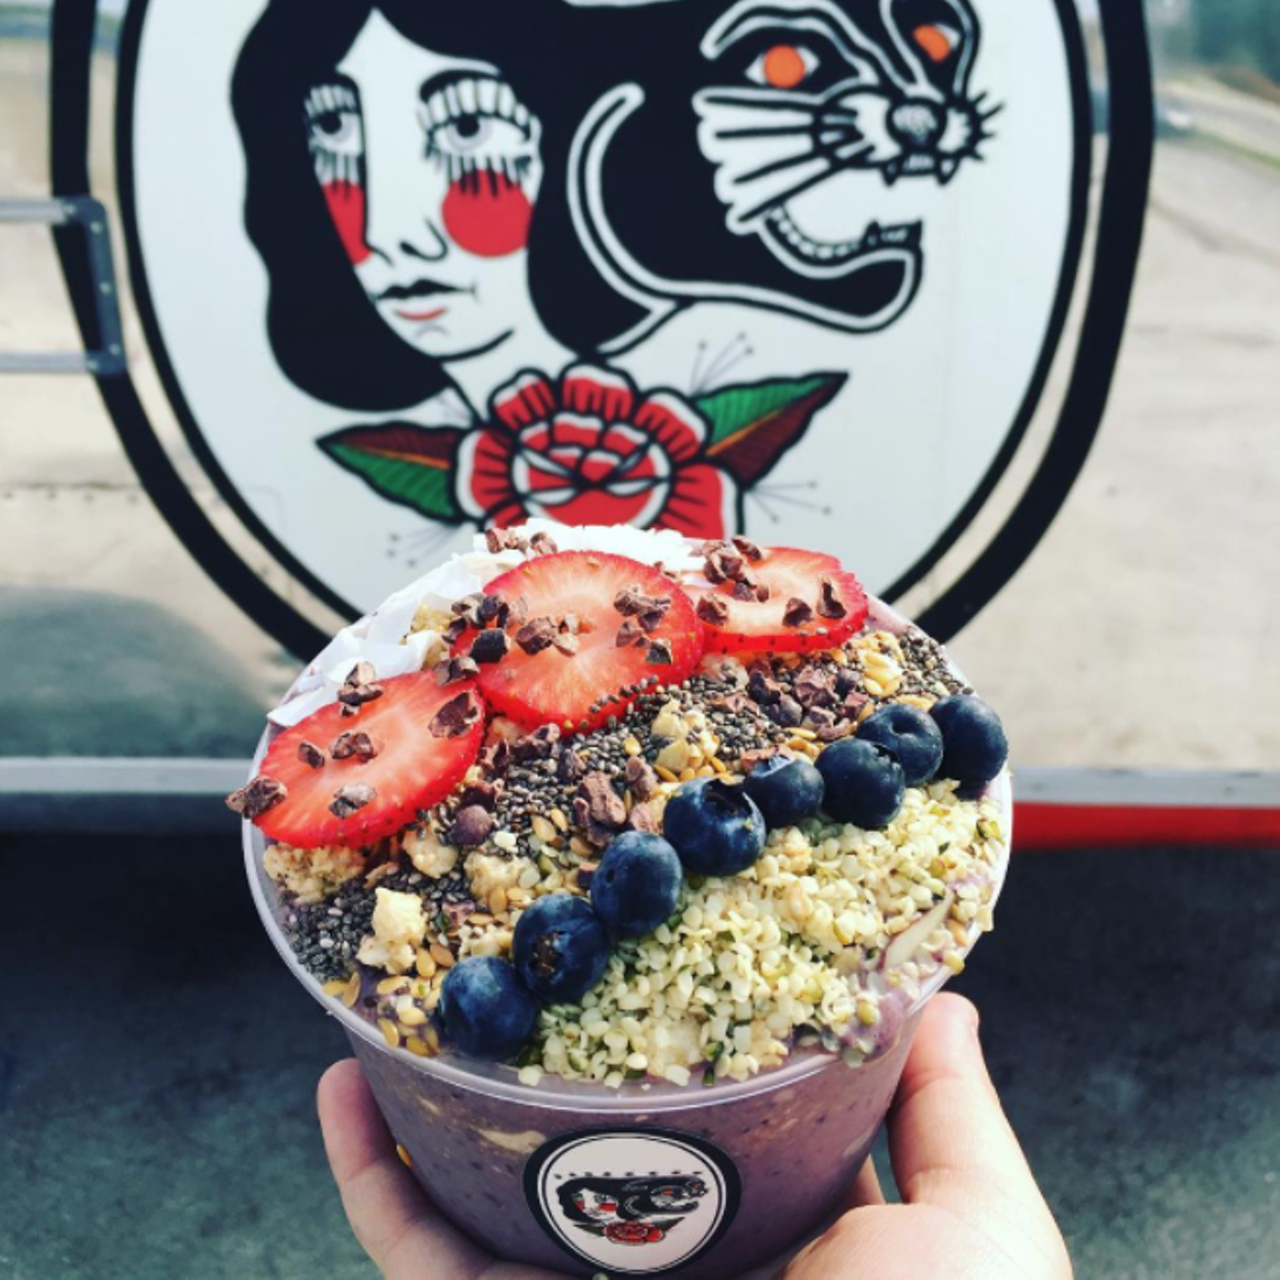 Rise Up
6401 Broadway, (210) 268-8009
The pitaya candy bowl is just as delicious as it sounds with ingredients that include the always fascinating pitaya fruit, apple juice, banana, pineapple and honey and with delicious toppings to match.
Photo via Instagram, riseupsatx